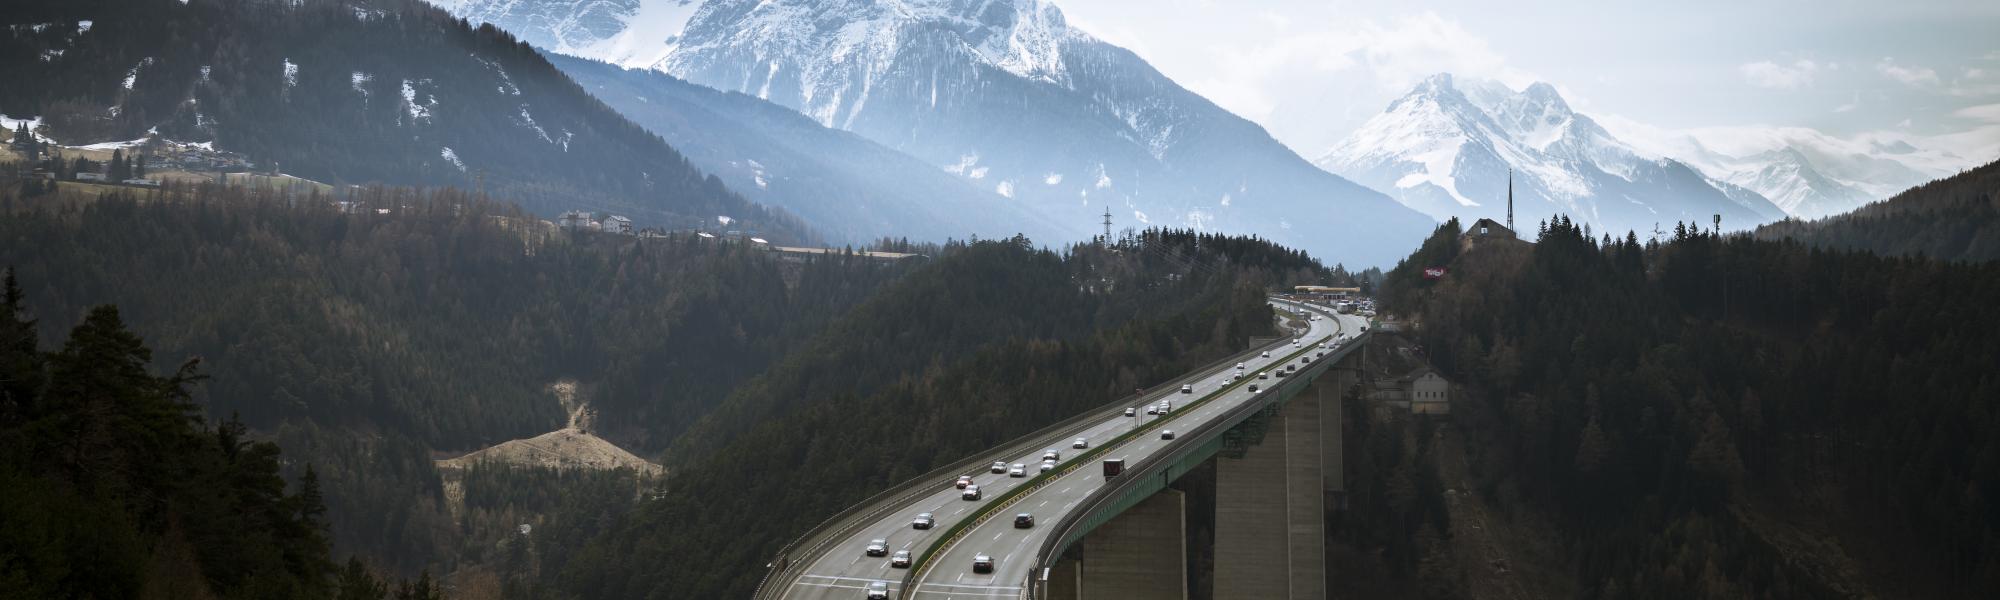 IRU welcomes Italy’s intention to take Austria to court over Brenner route